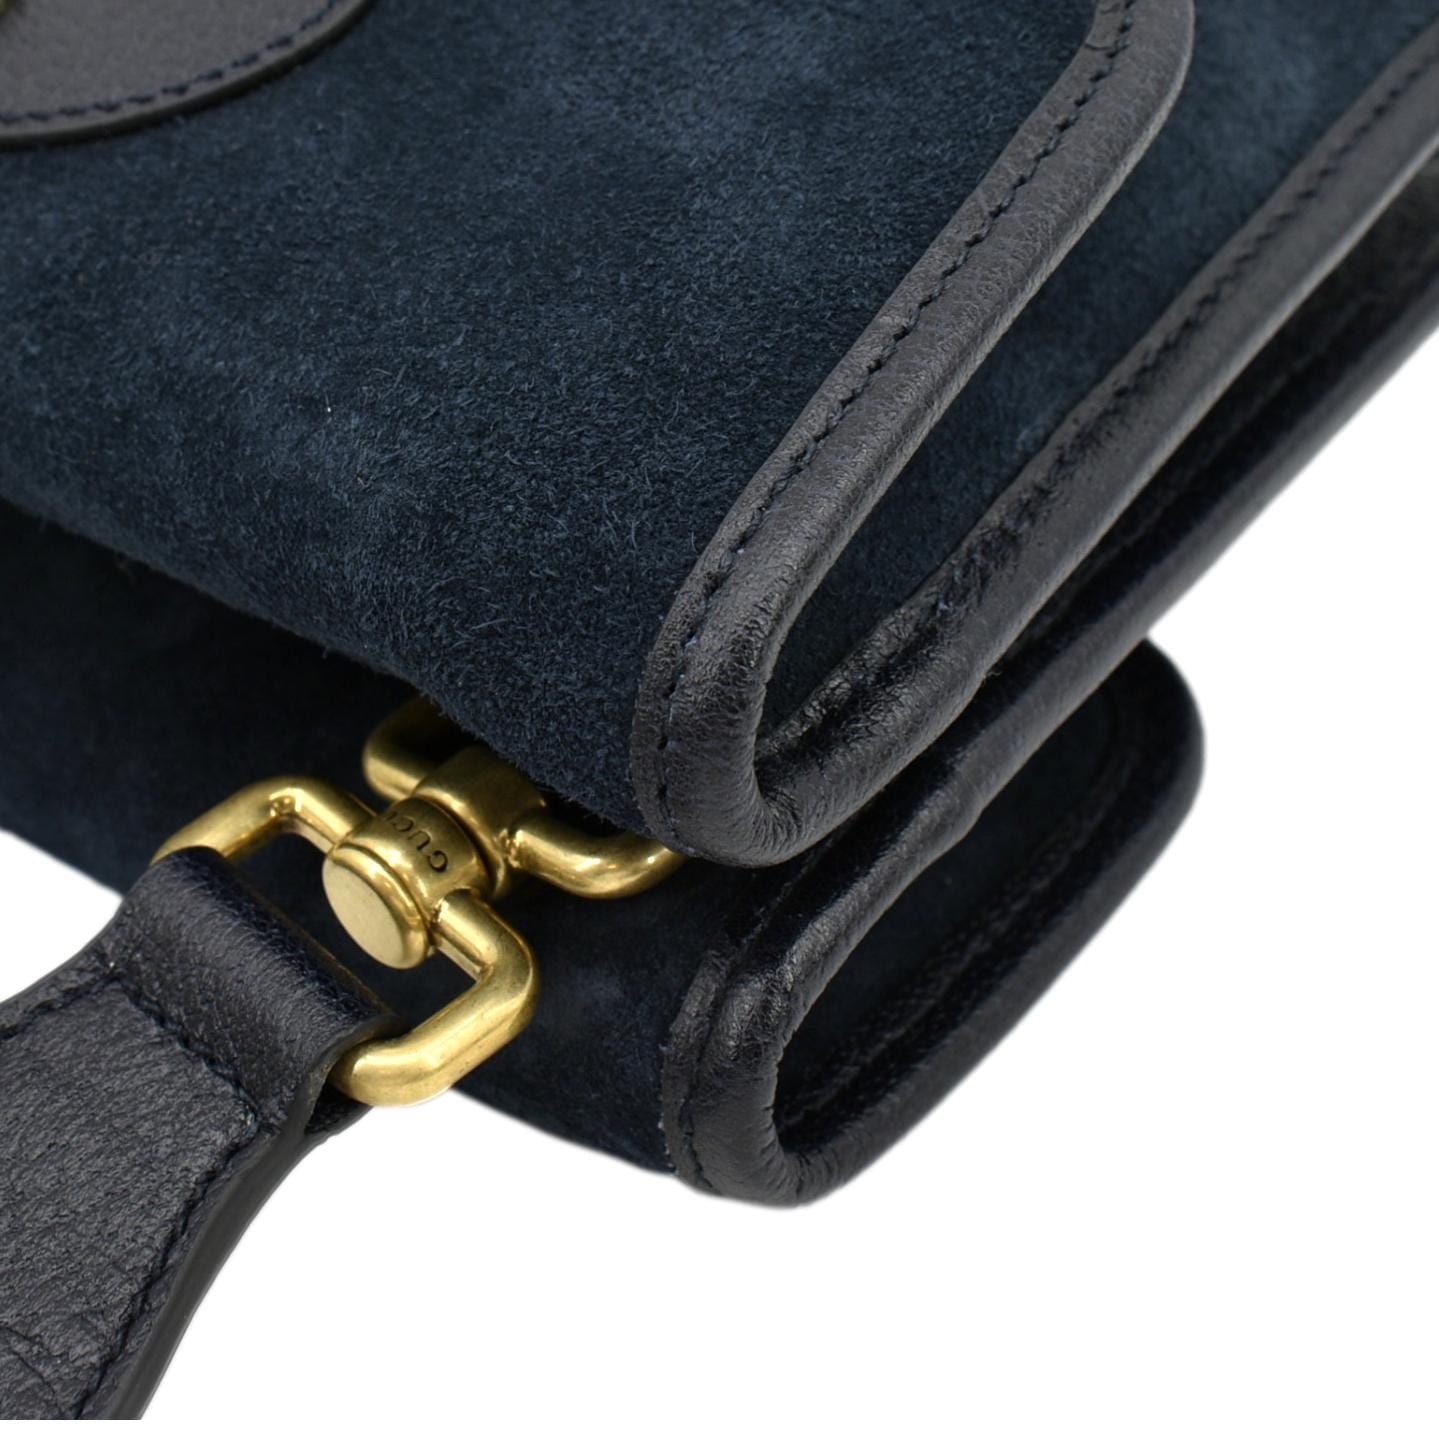 The Sconset Clutch + Crossbody Bag | by Beau & Ro | in Navy Blue